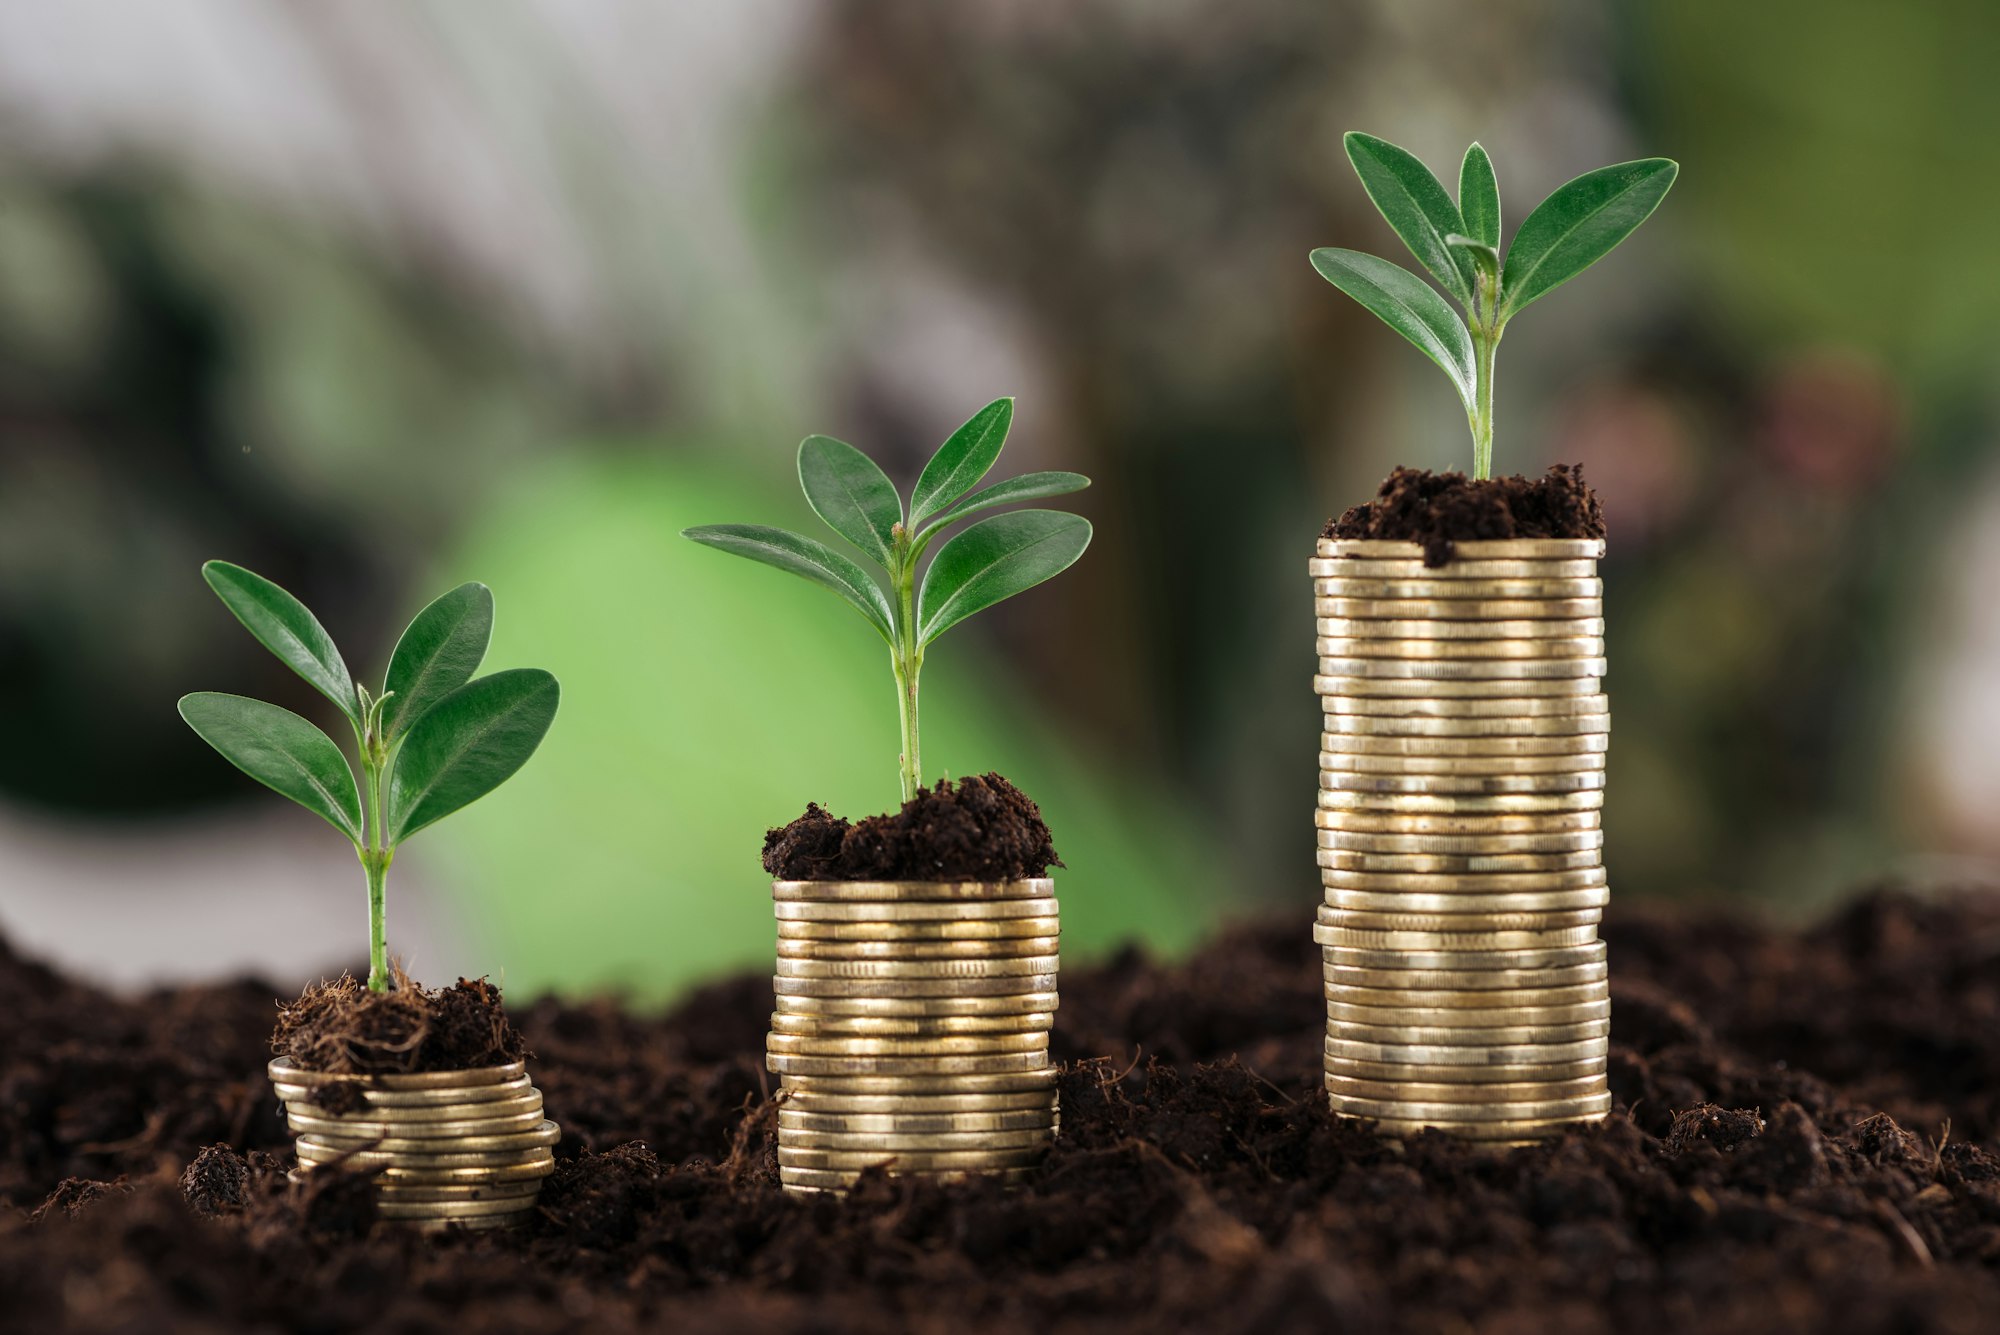 selective focus of arranged golden coins with green leaves and soil, financial growth concept